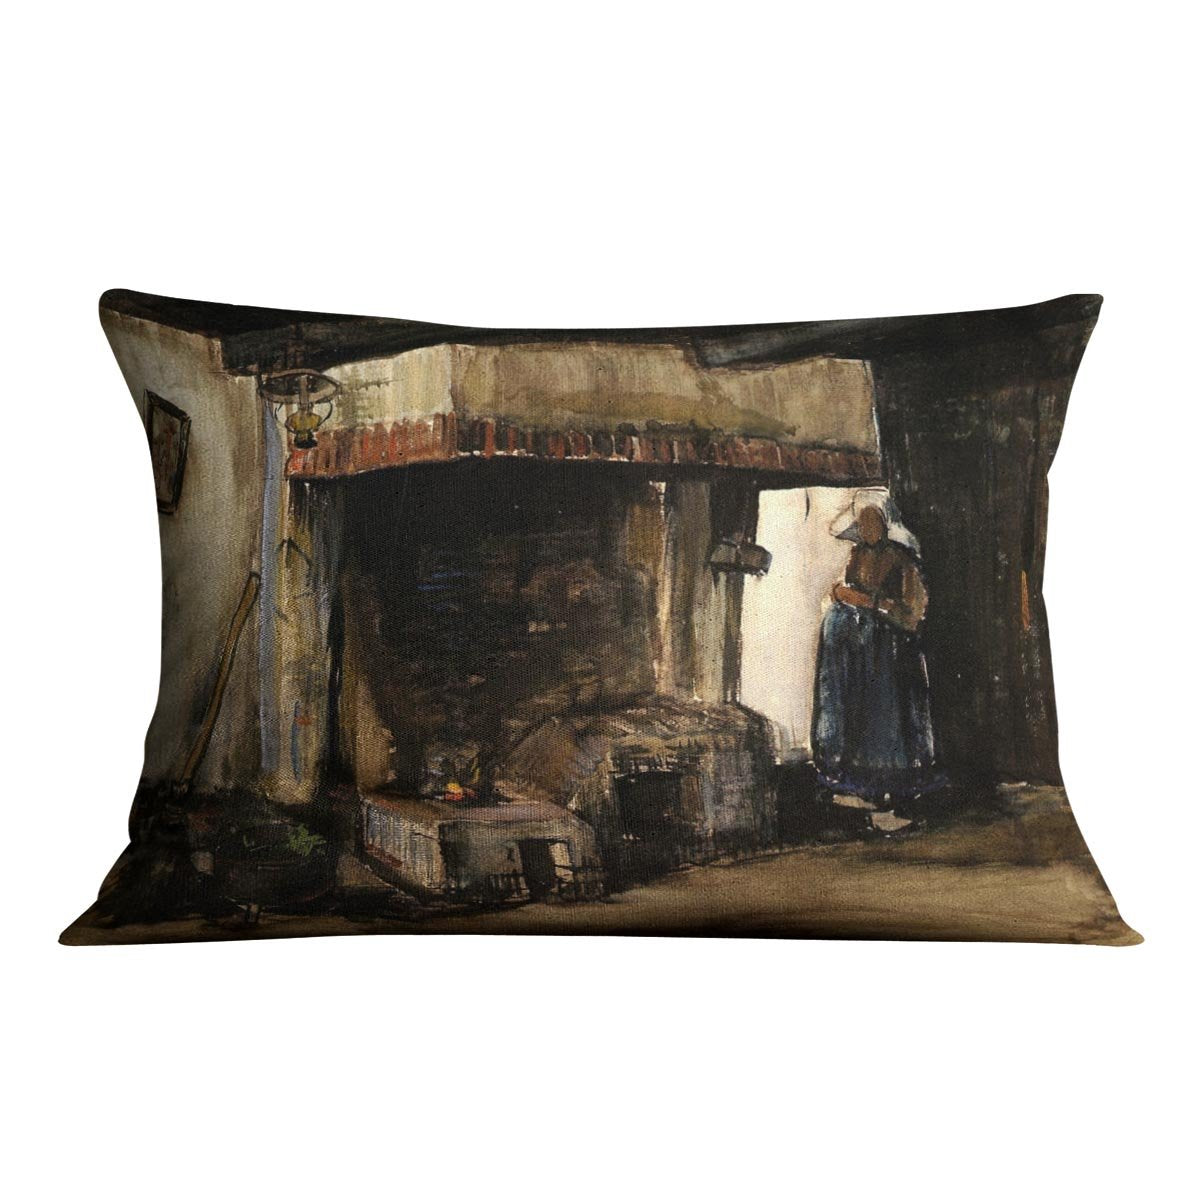 Woman by a Hearth by Van Gogh Throw Pillow